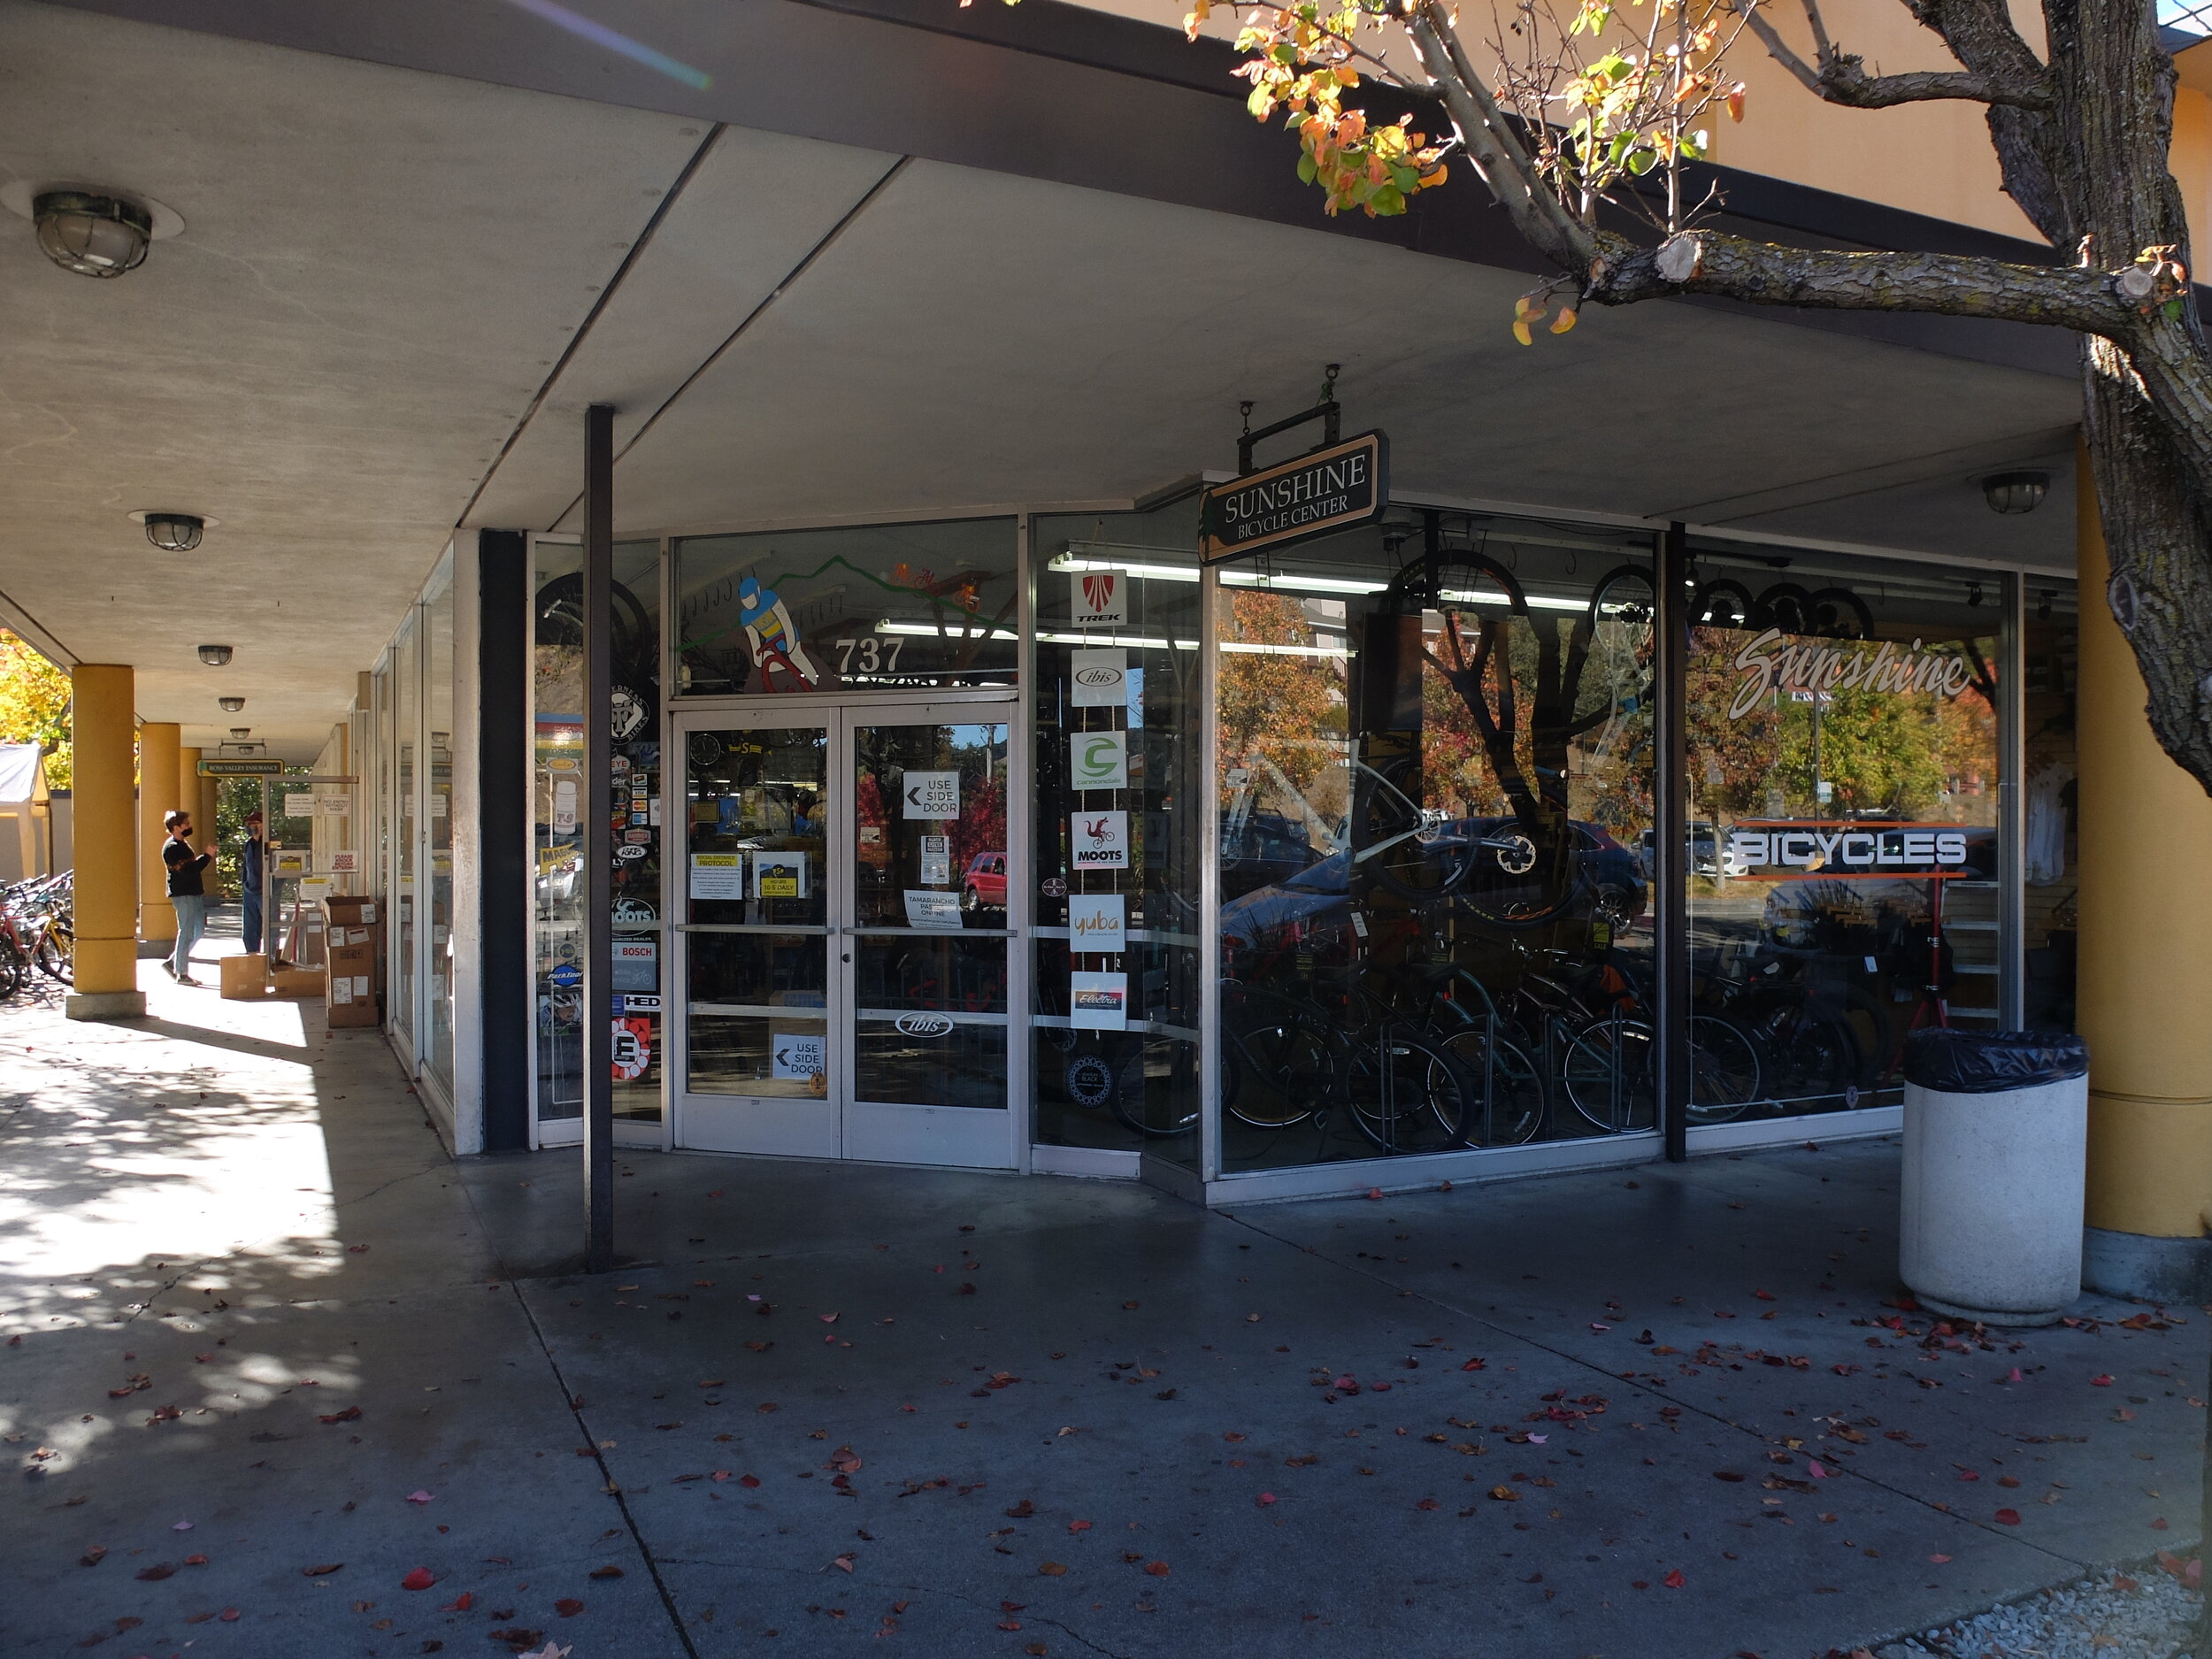  In Fairfax since 1971, Sunshine Bicycles is one of the oldest bike shops in Marin.  It's located a few blocks from ascents to mountain bike riding on Mt. Tamalpais &amp; a block off Sir Francis Drake Blvd. with access to spectacular road riding in W